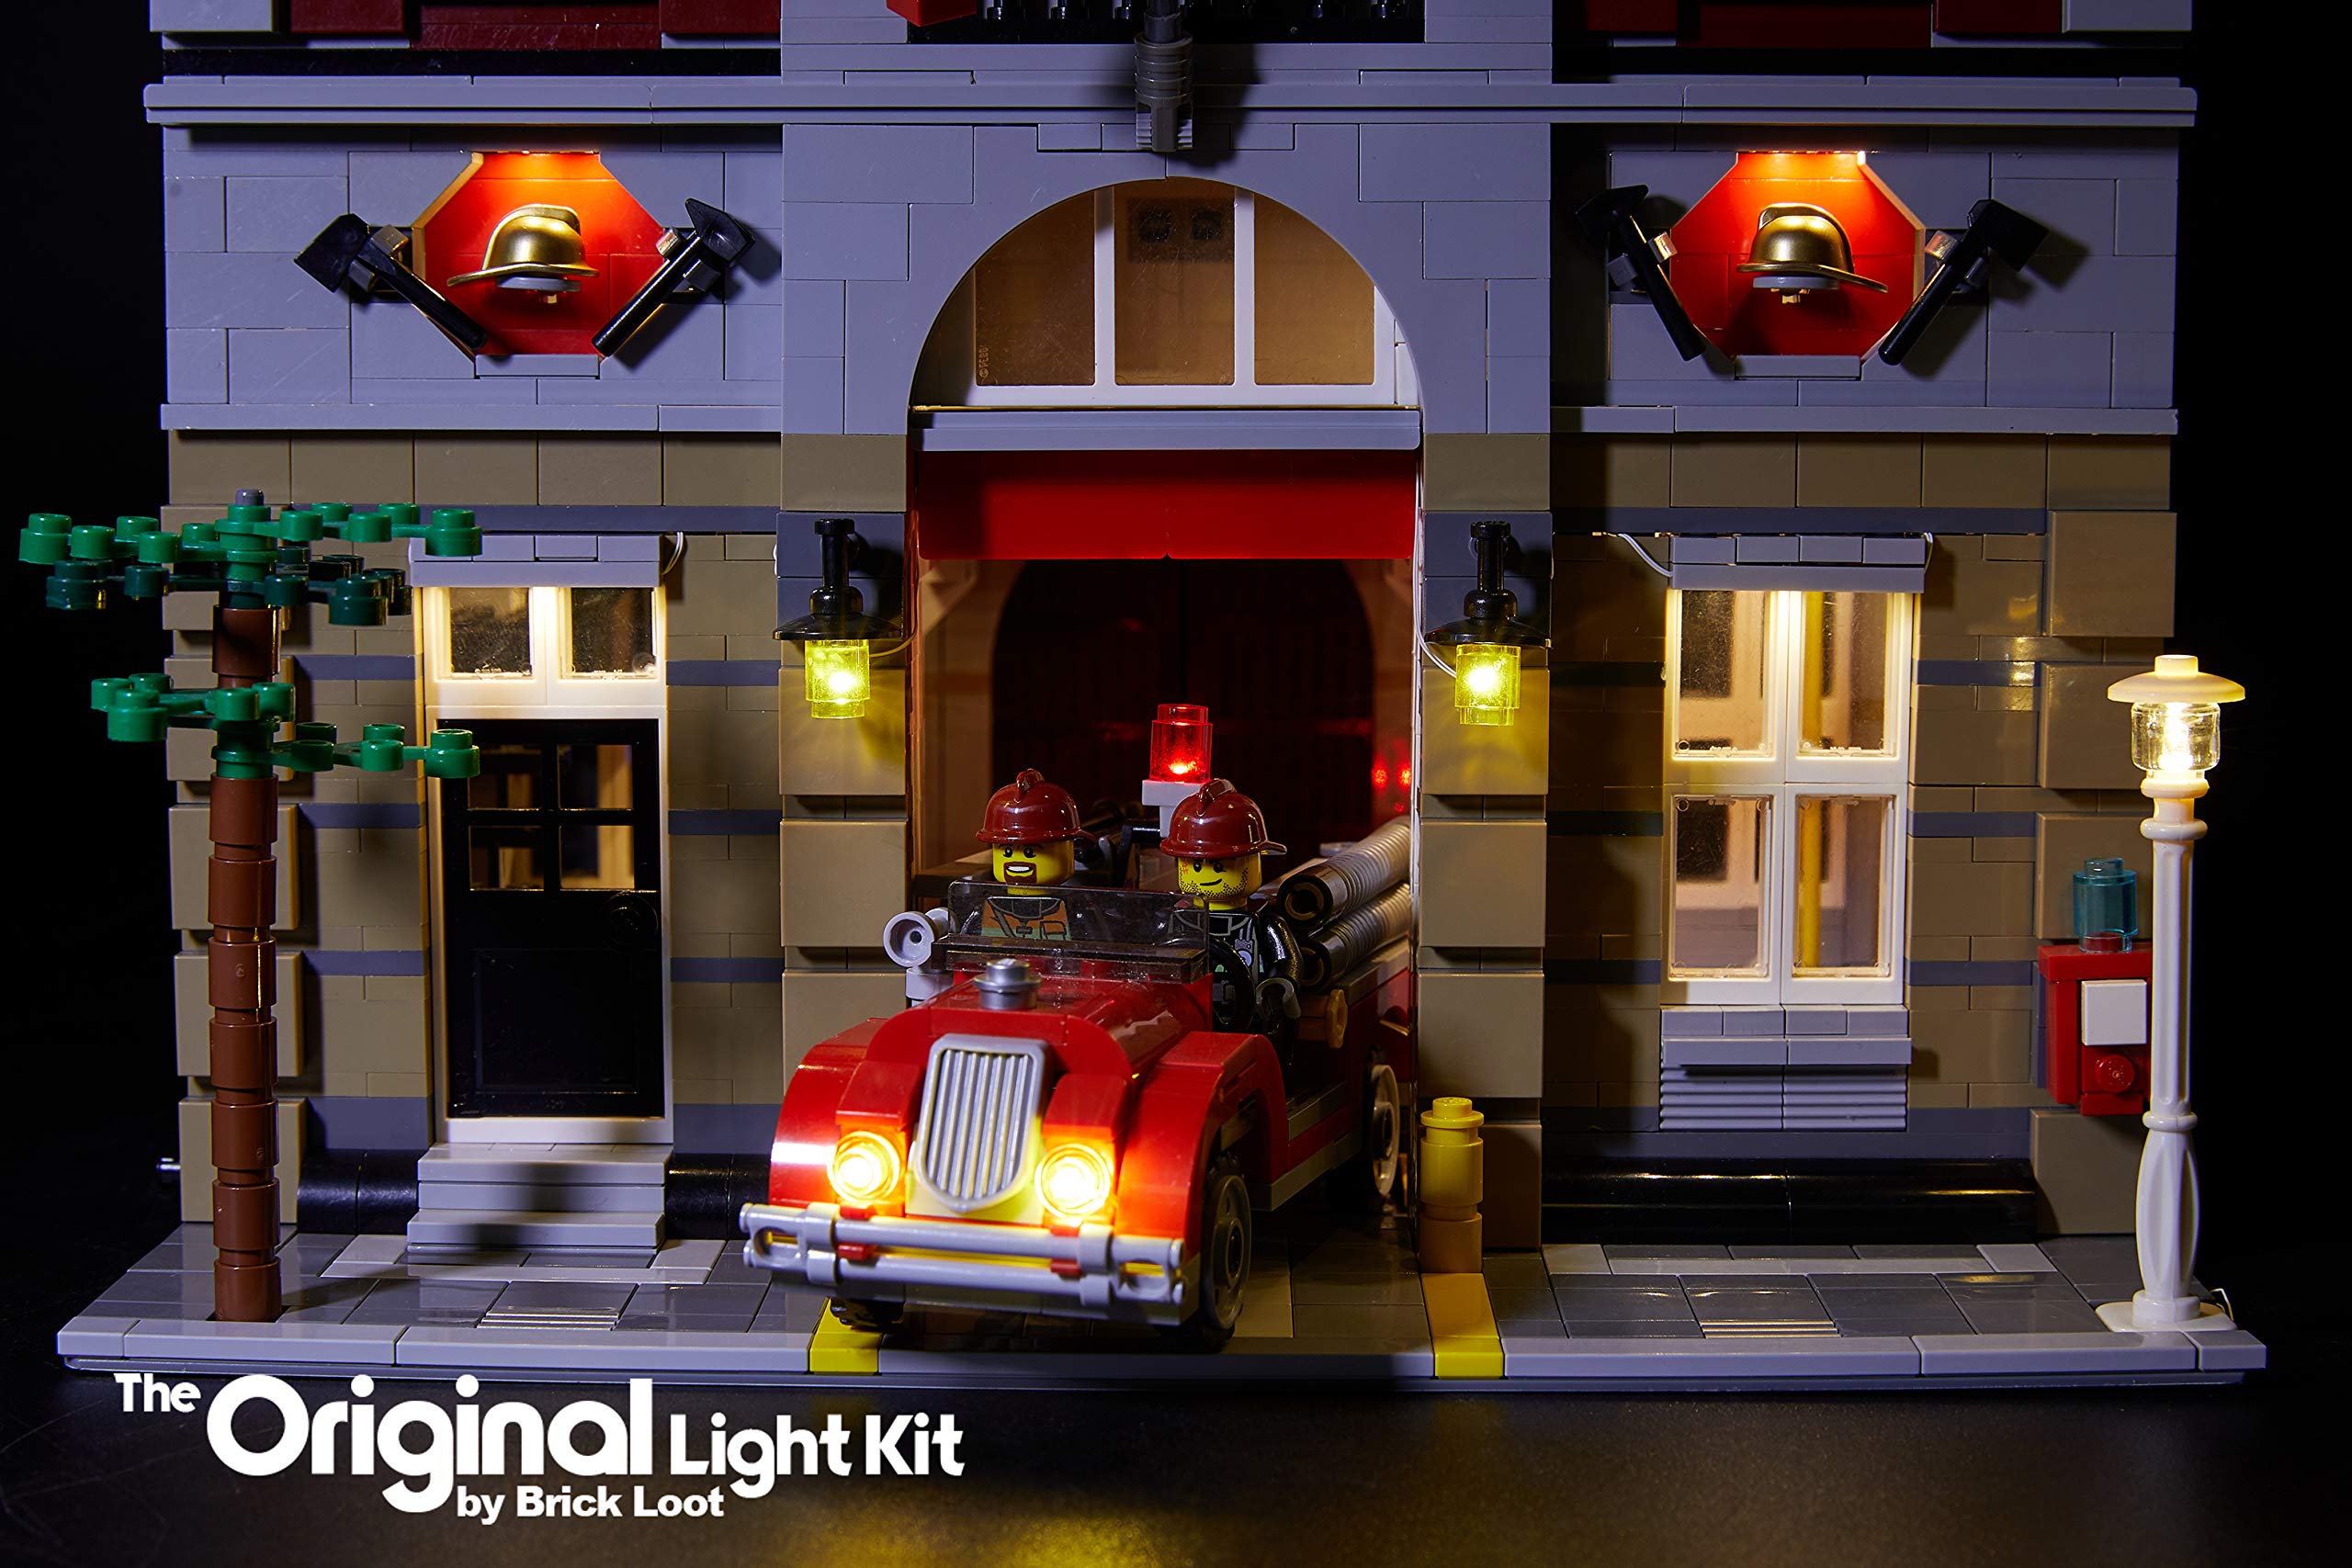 Brick Loot Lighting Kit for Your Lego Fire Brigade Set 10197 (LEGO set not included) - image 4 of 6